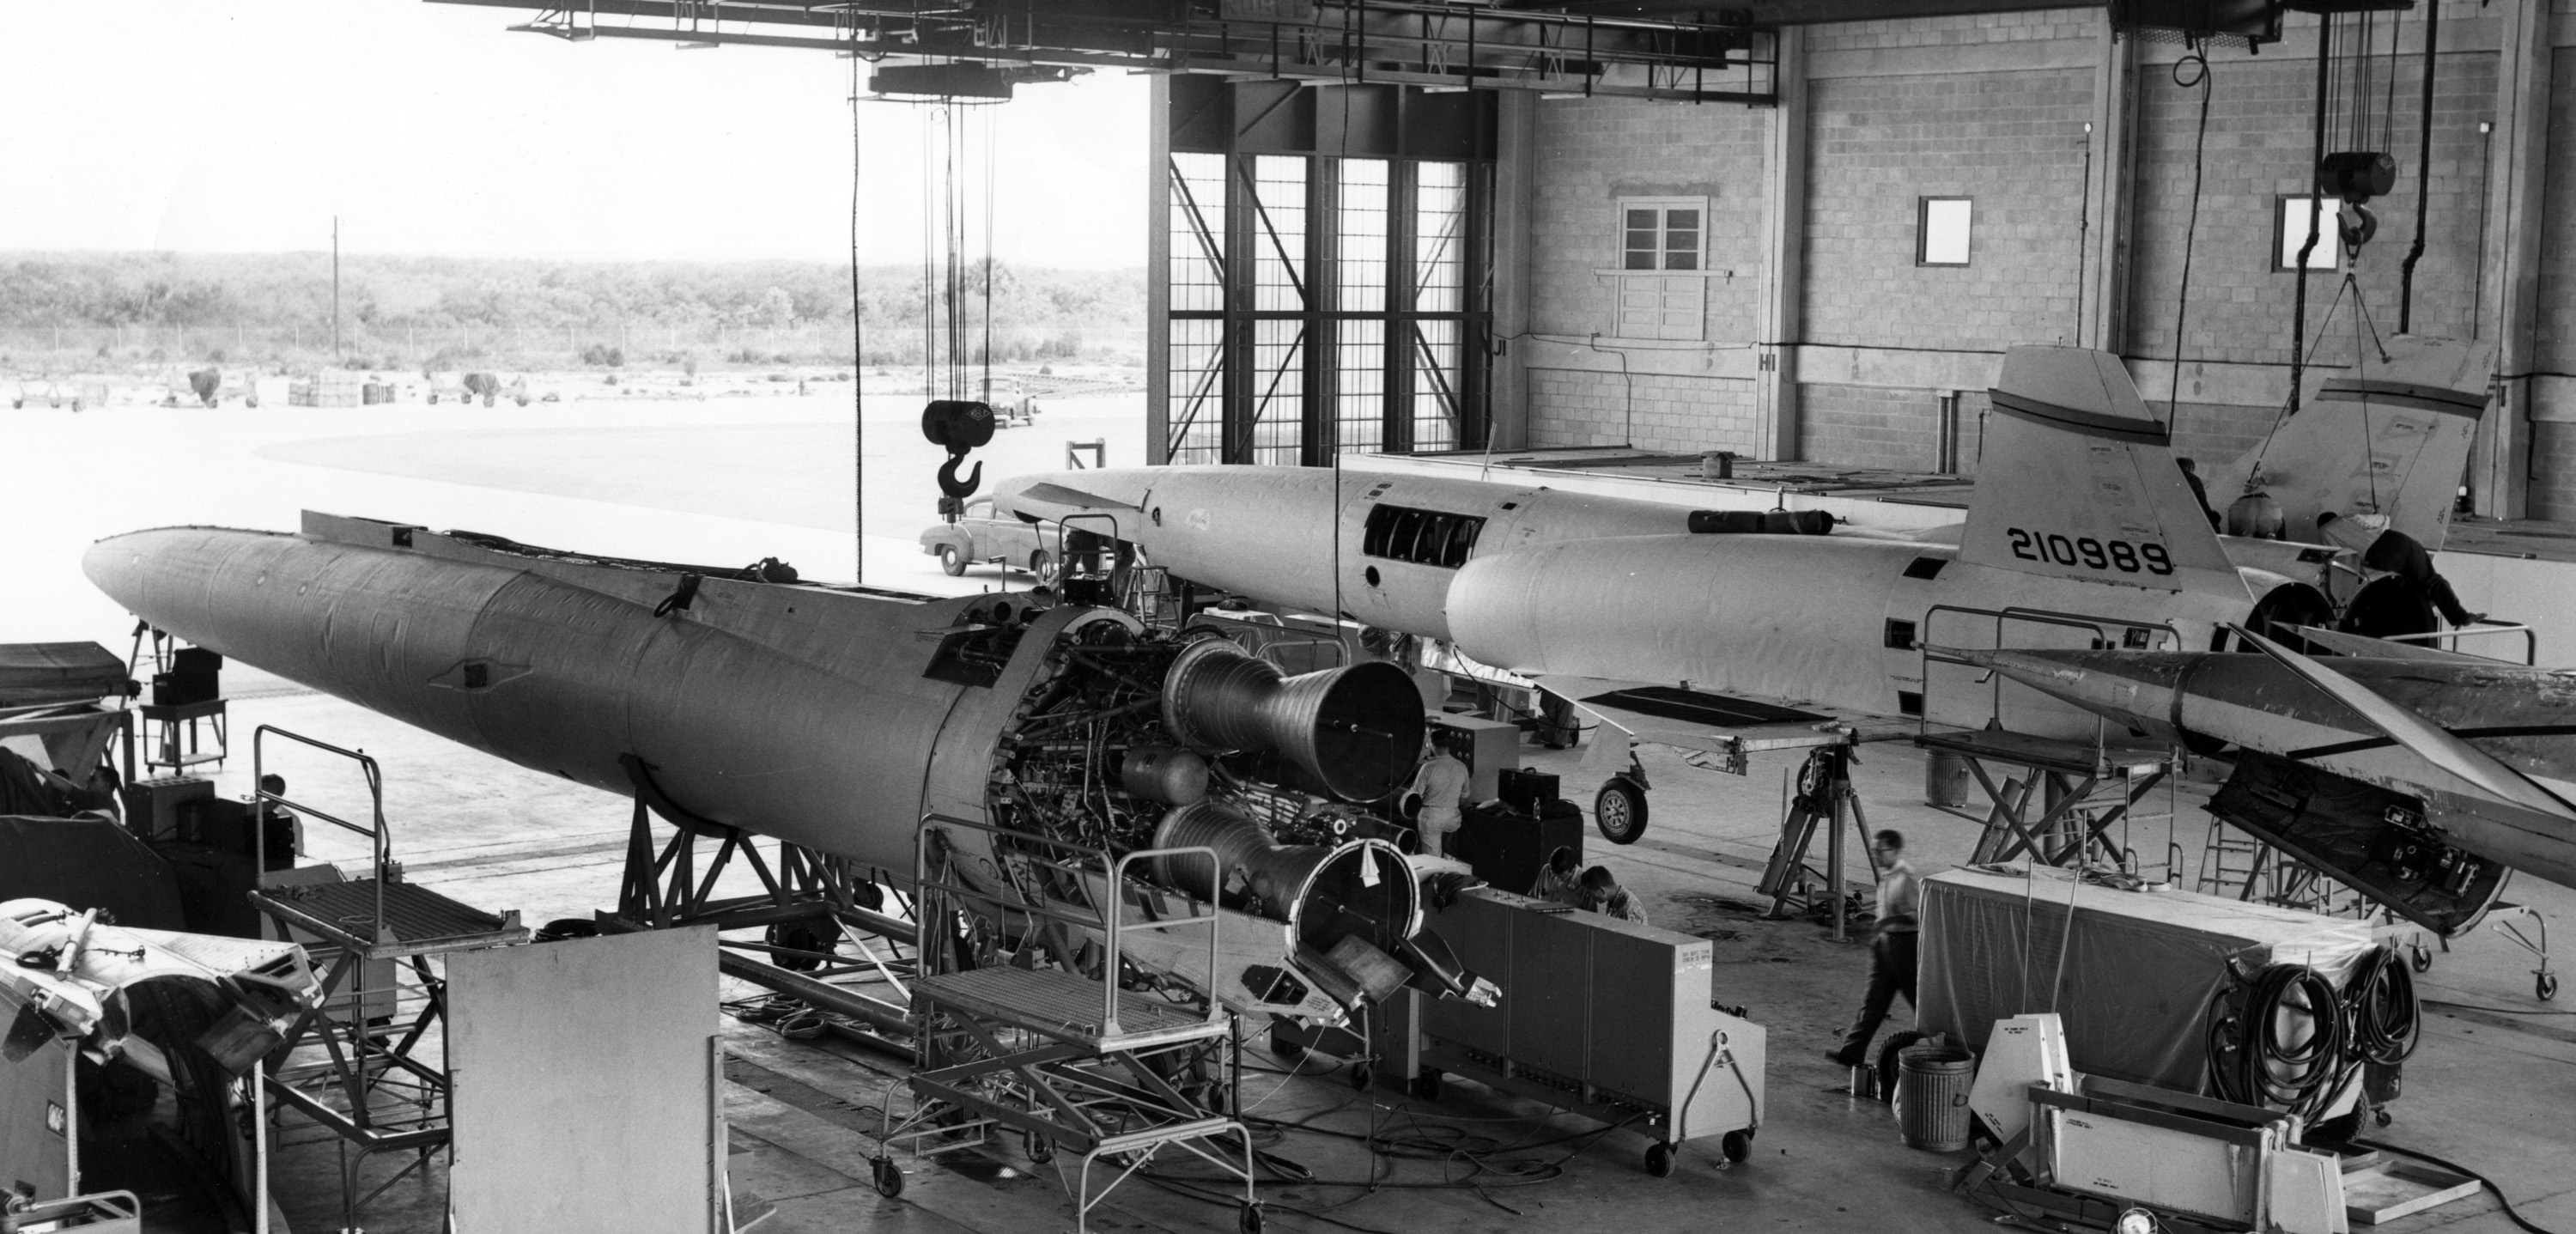  The first XSM-64 launched, sits in its hangar at the East Coast launch facility undergoing final assembly and testing. Clearly seen are the Rocketdyne XLR71 engines on the booster.